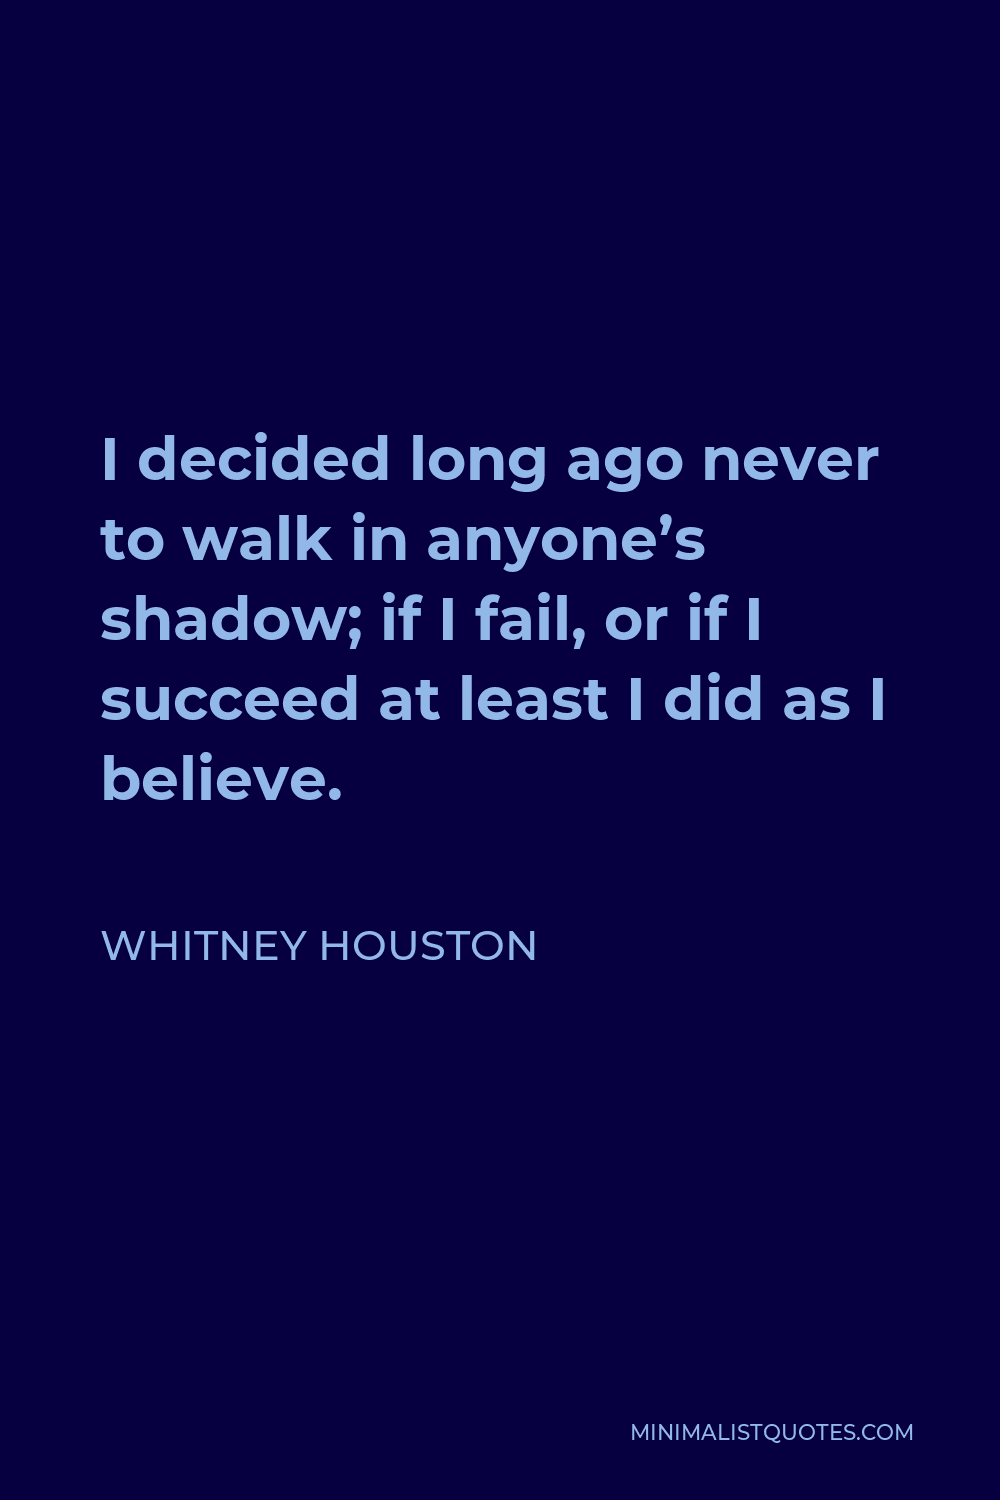 Whitney Houston Quote - I decided long ago never to walk in anyone’s shadow; if I fail, or if I succeed at least I did as I believe.